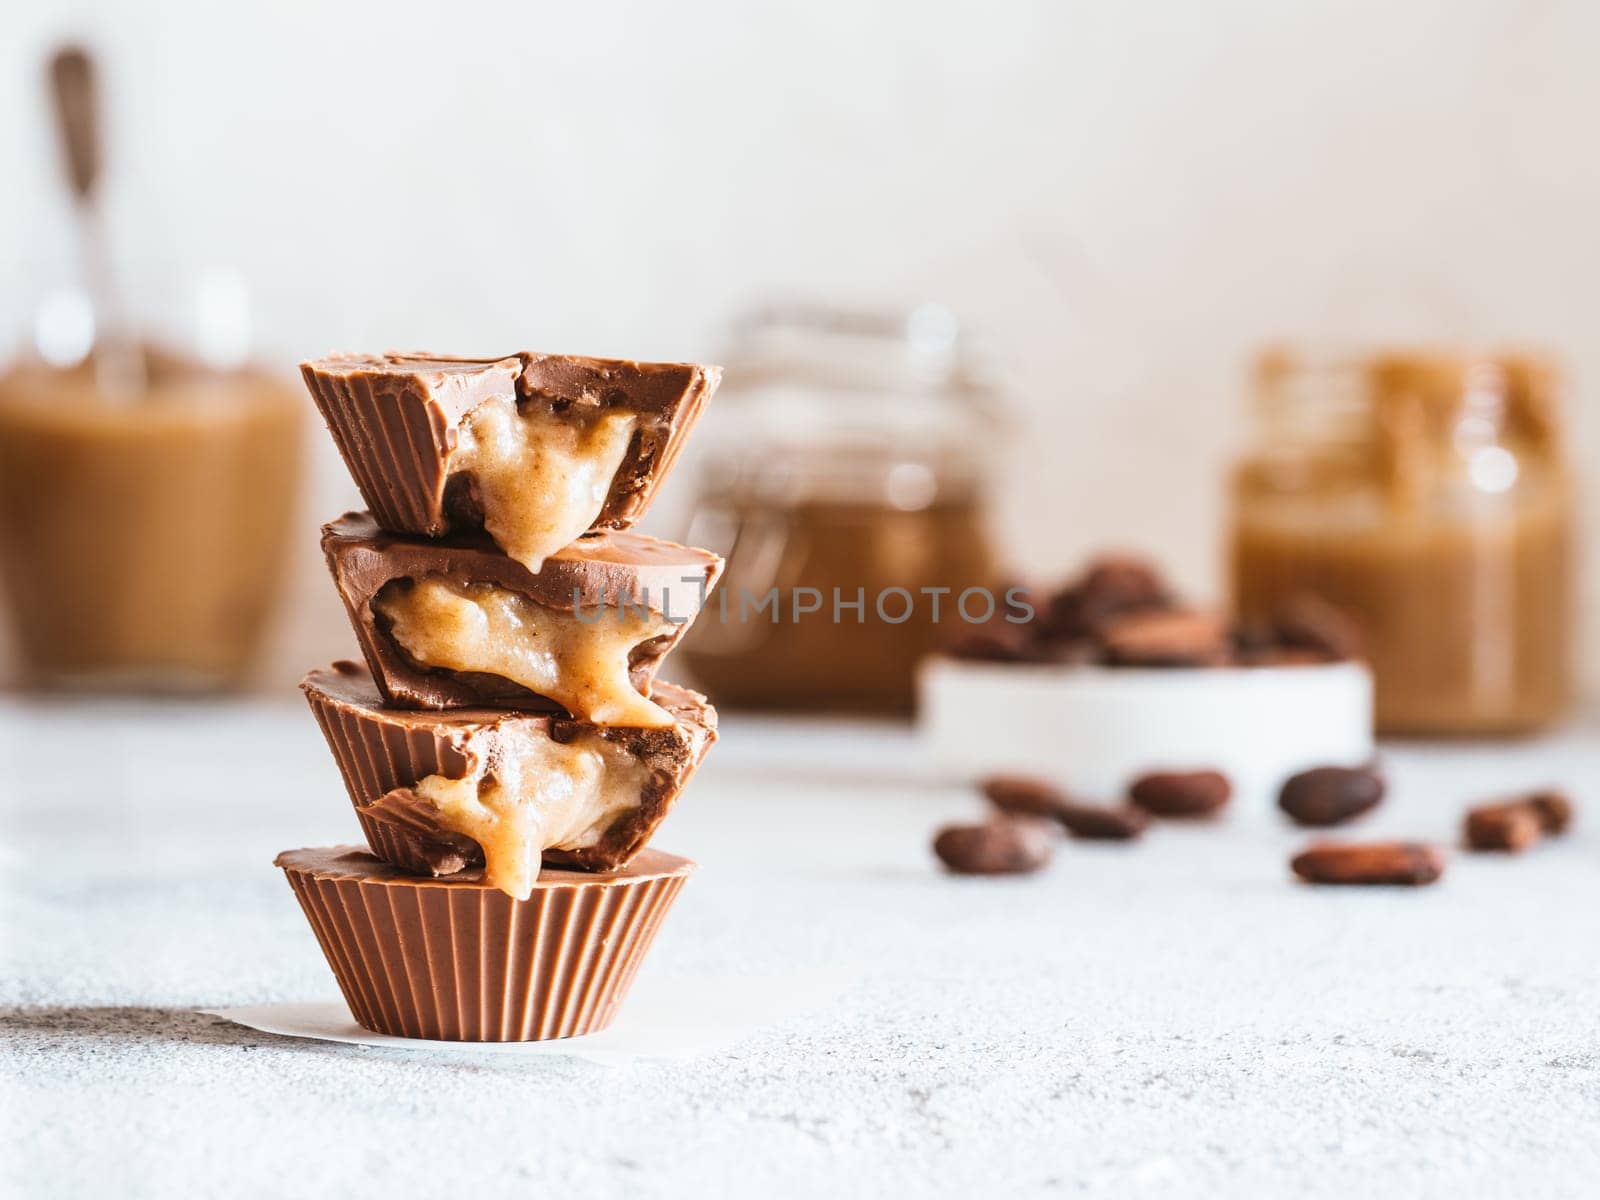 Stack of vegan chocolate cups with caramel on white tabletop. Homemade vegetarian chocolate caramel cups with raw cacao chocolate. Ideas and recipes for healthy sweets and dessert. Copy space for text